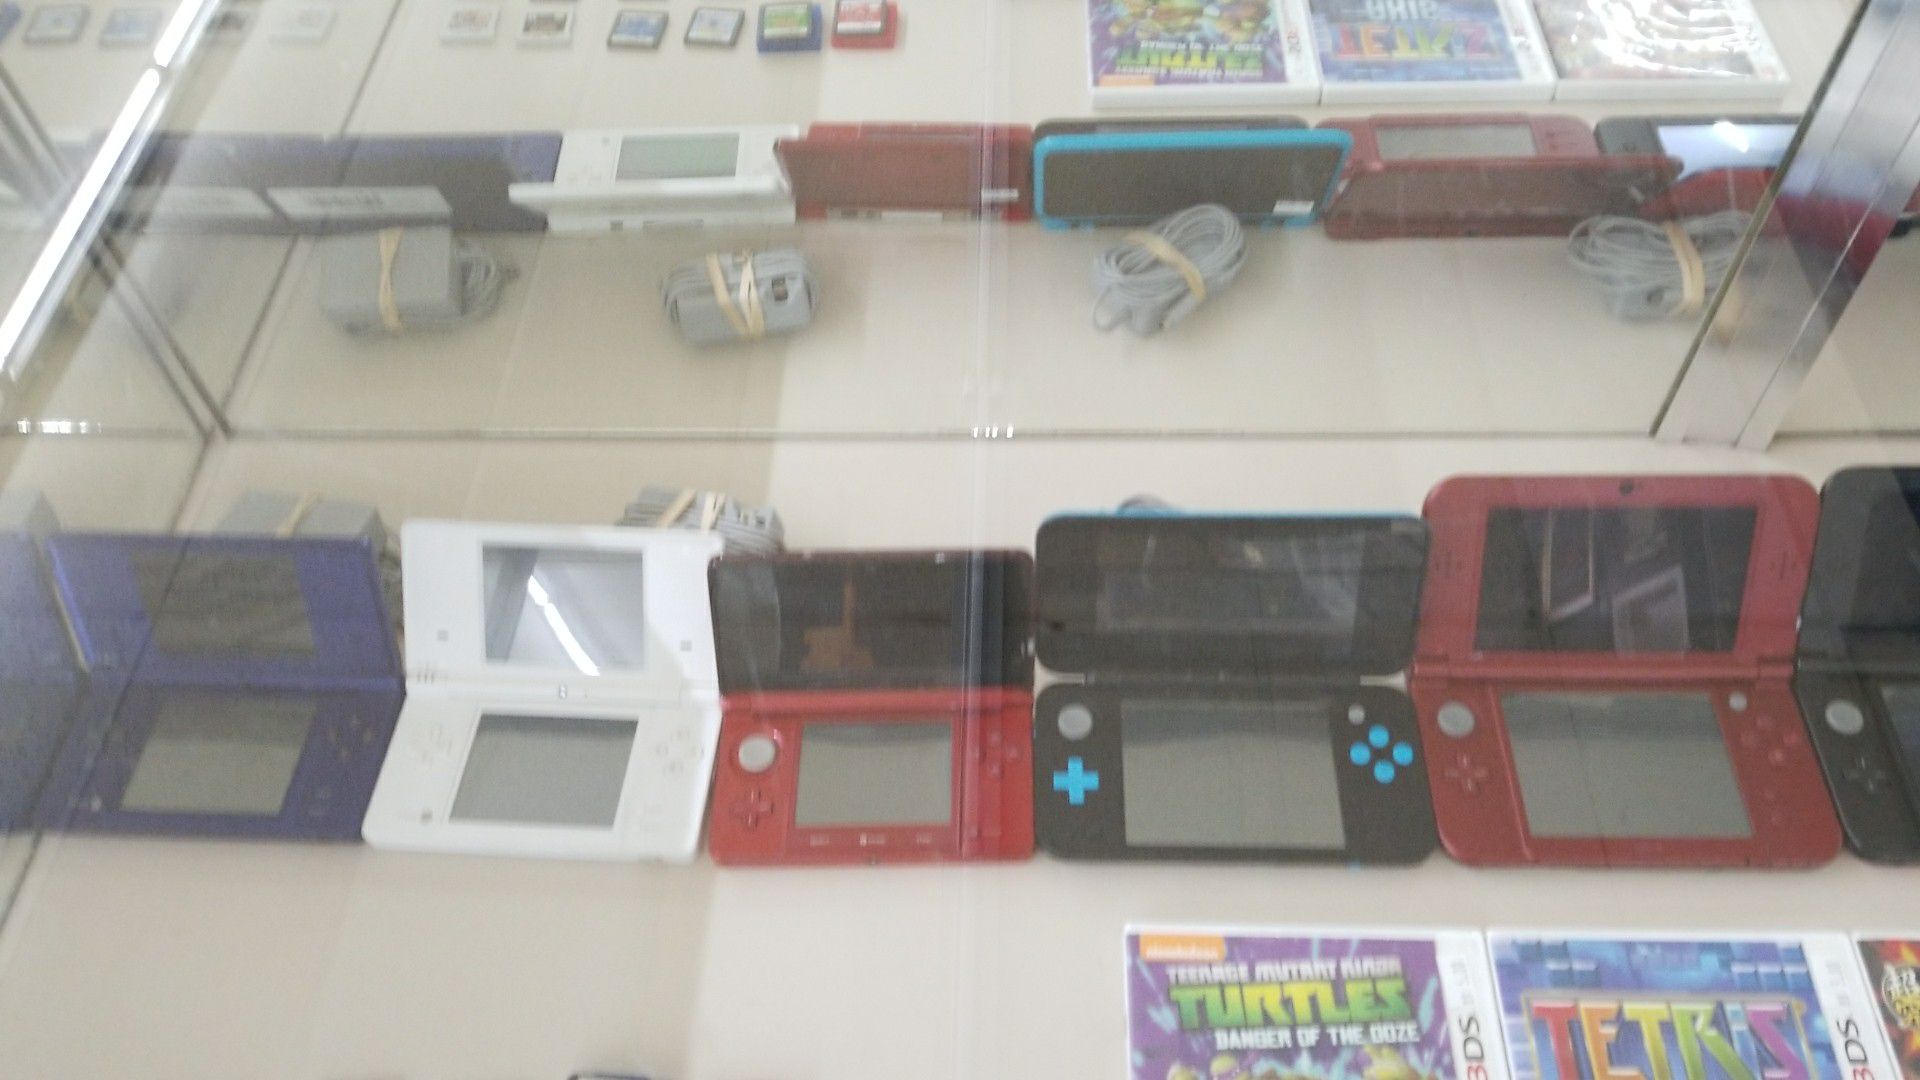 Nintendo Ds and 3Ds